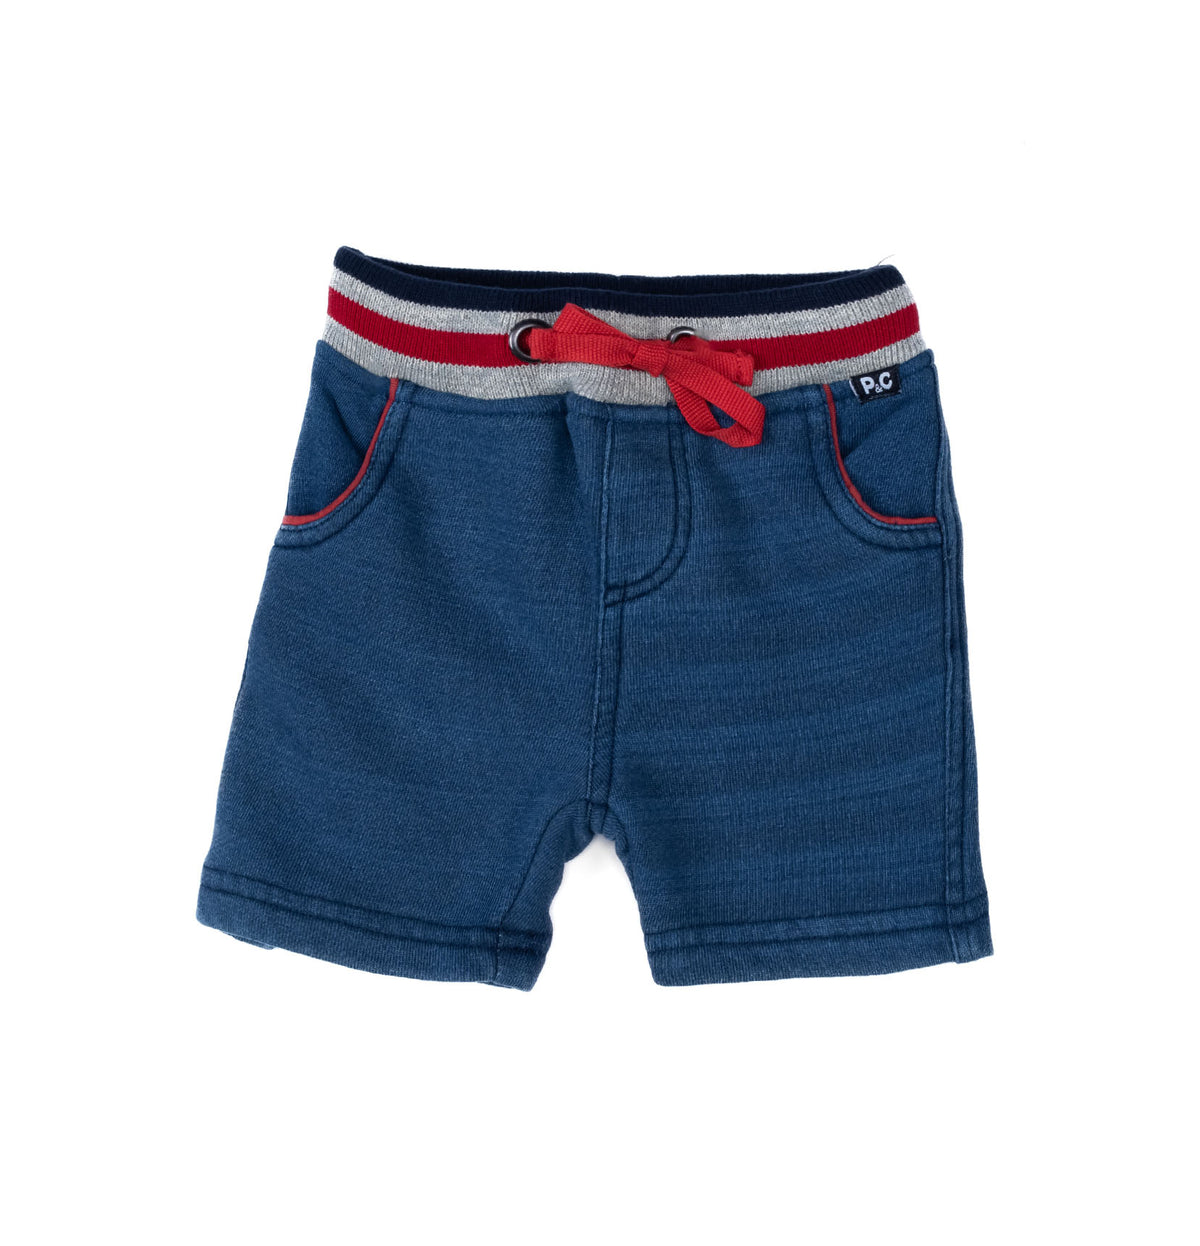 Denim jeans shorts with red ribbon by Pompelo